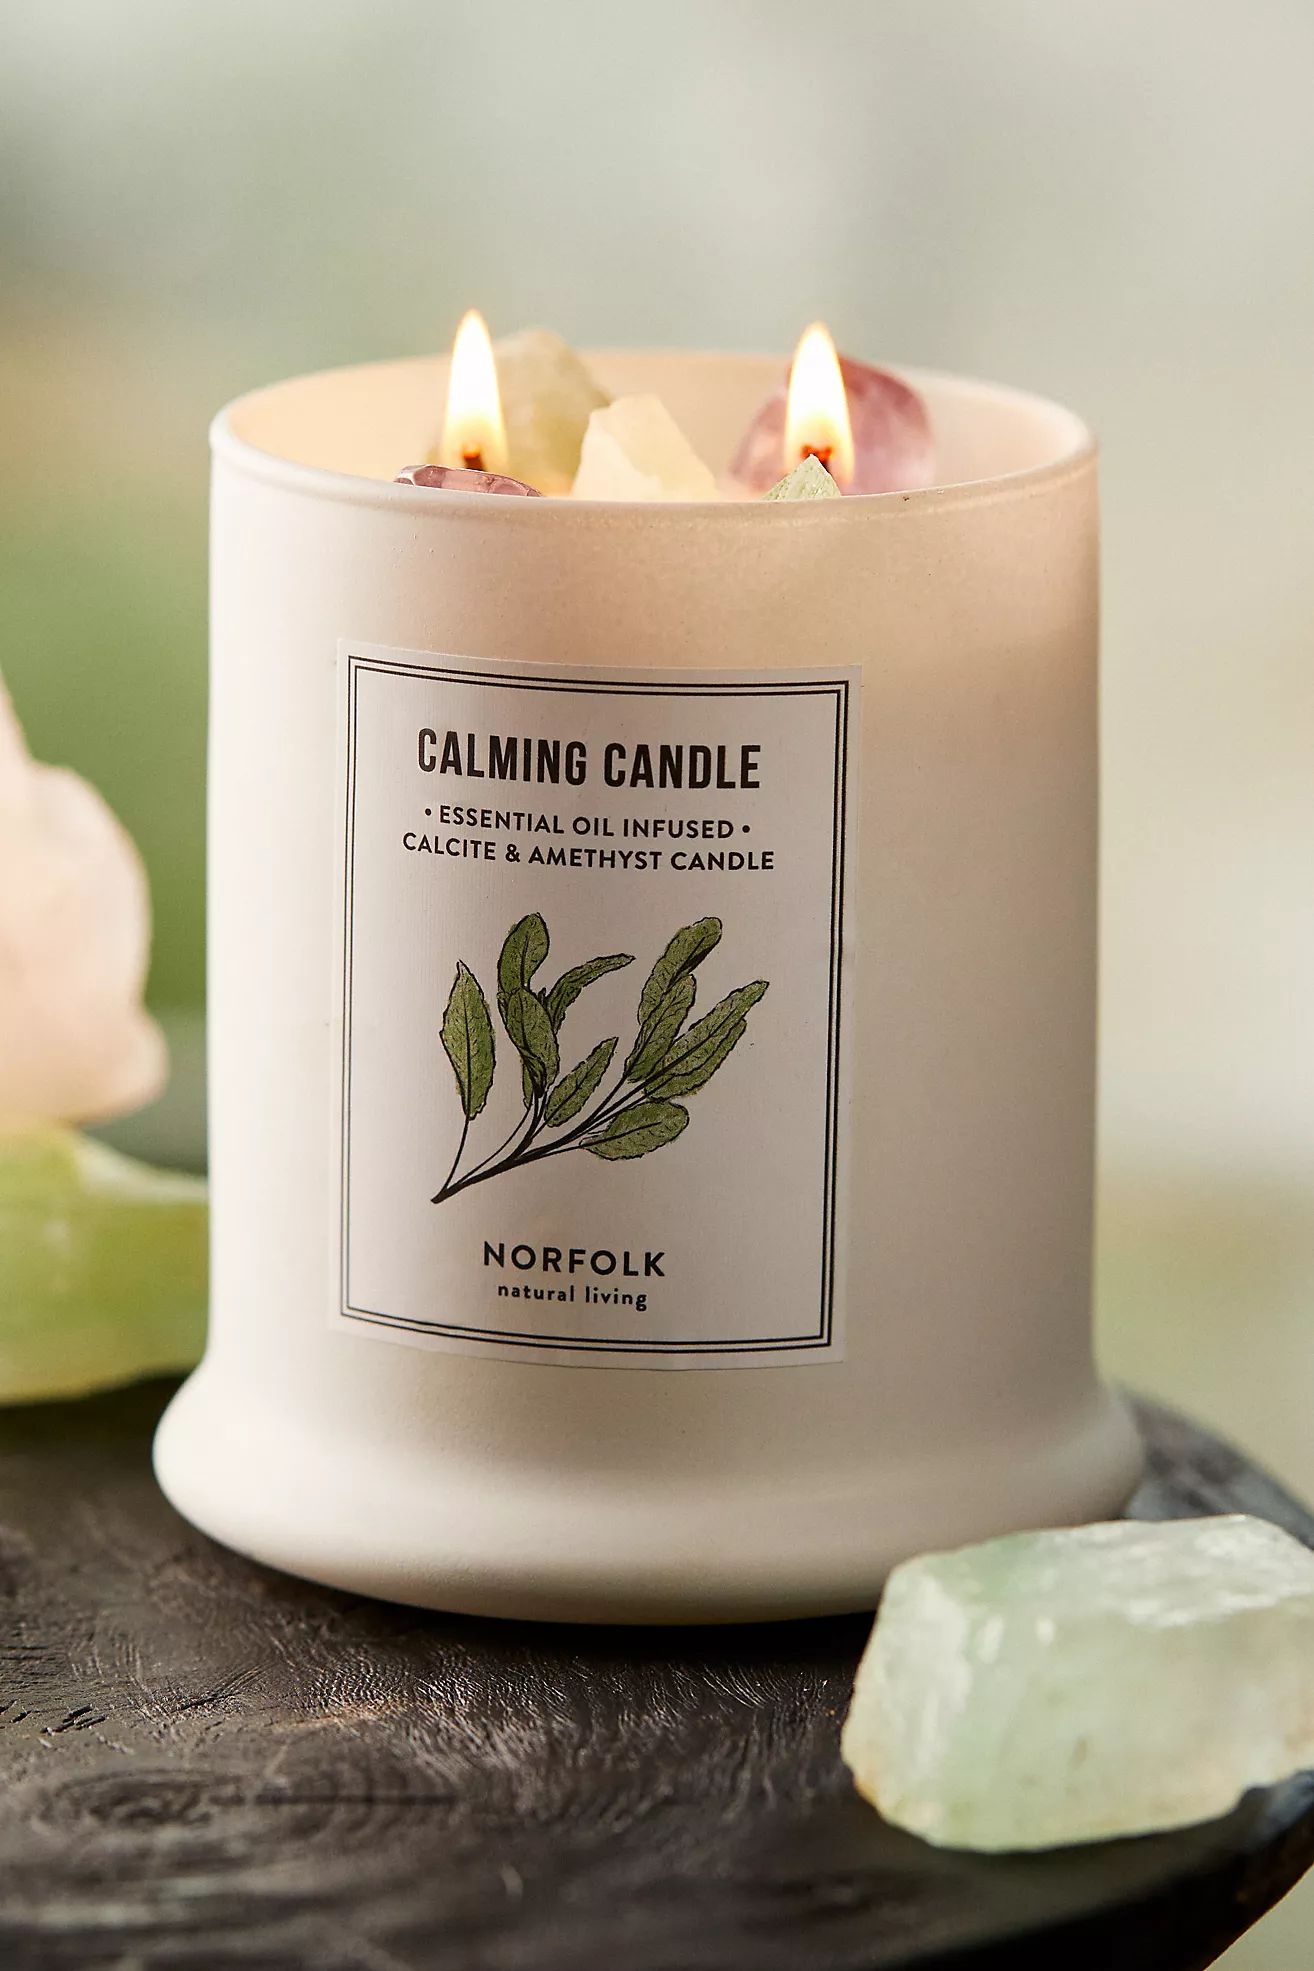 Amethyst + Calcite Candle, Marjoram + Chamomile | Anthropologie (US)